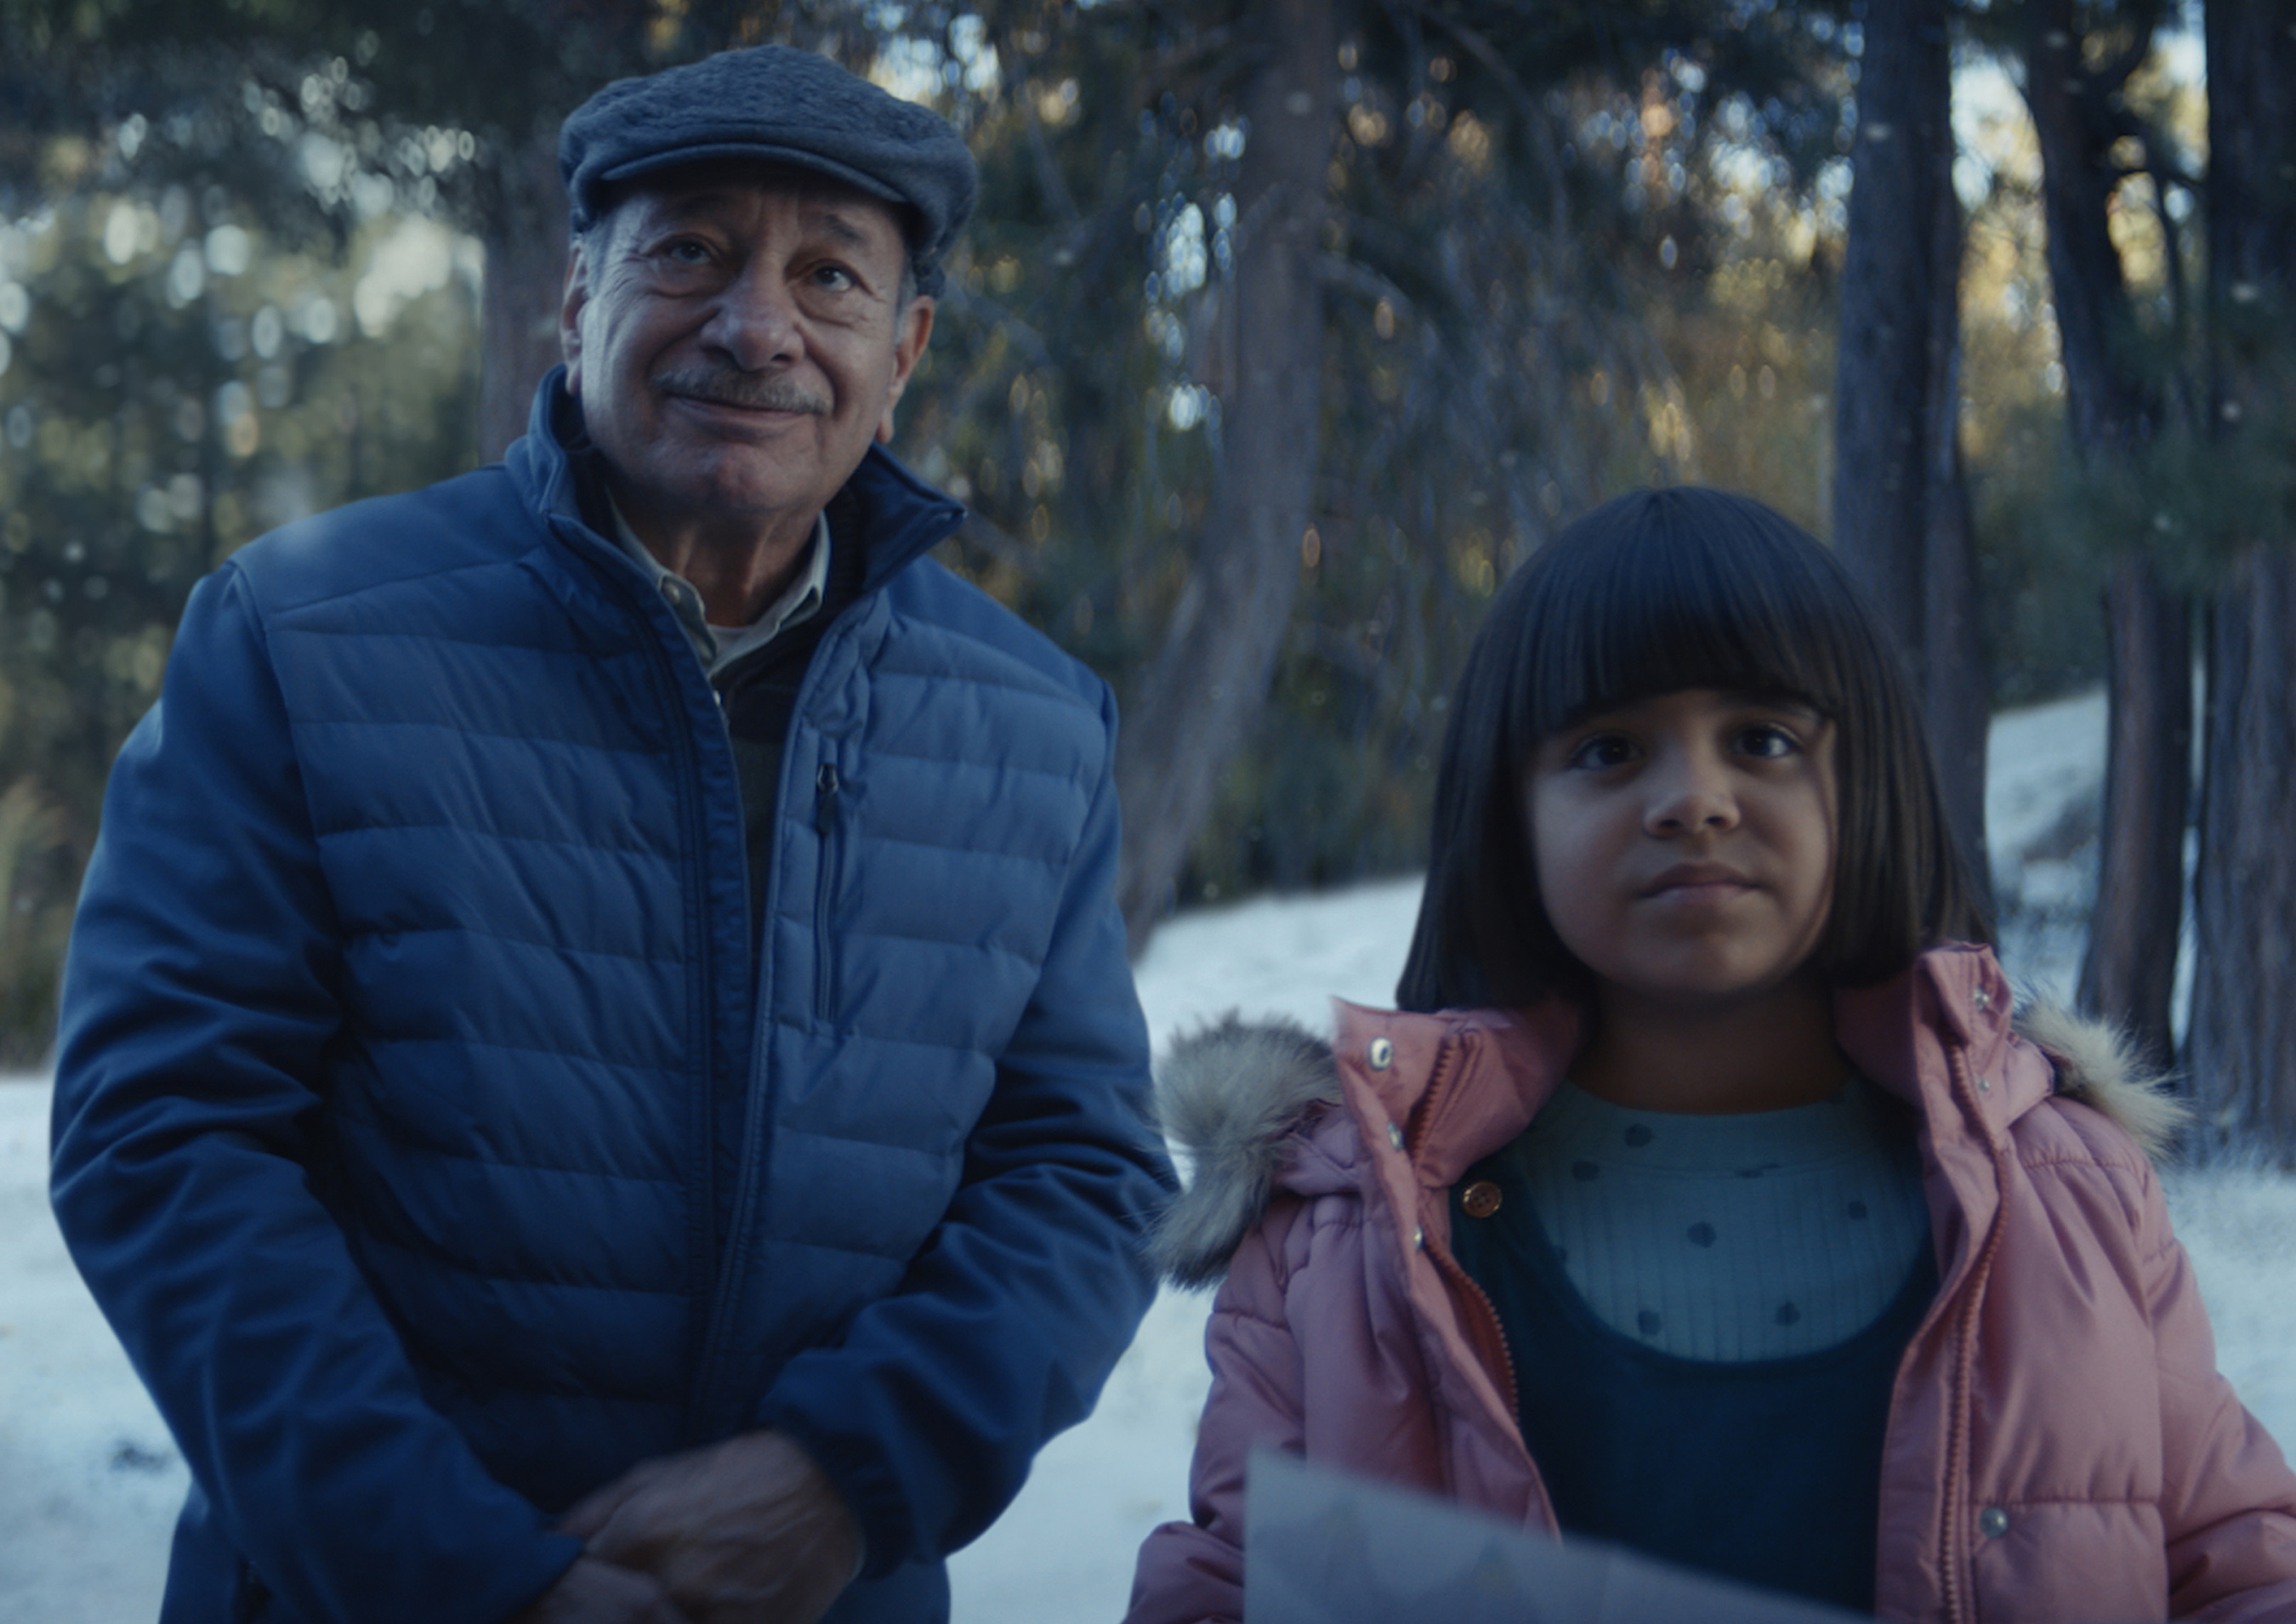 Toyota’s holiday spot “The Search” shares a heartwarming Christmas story, developed by Conill Advertising.